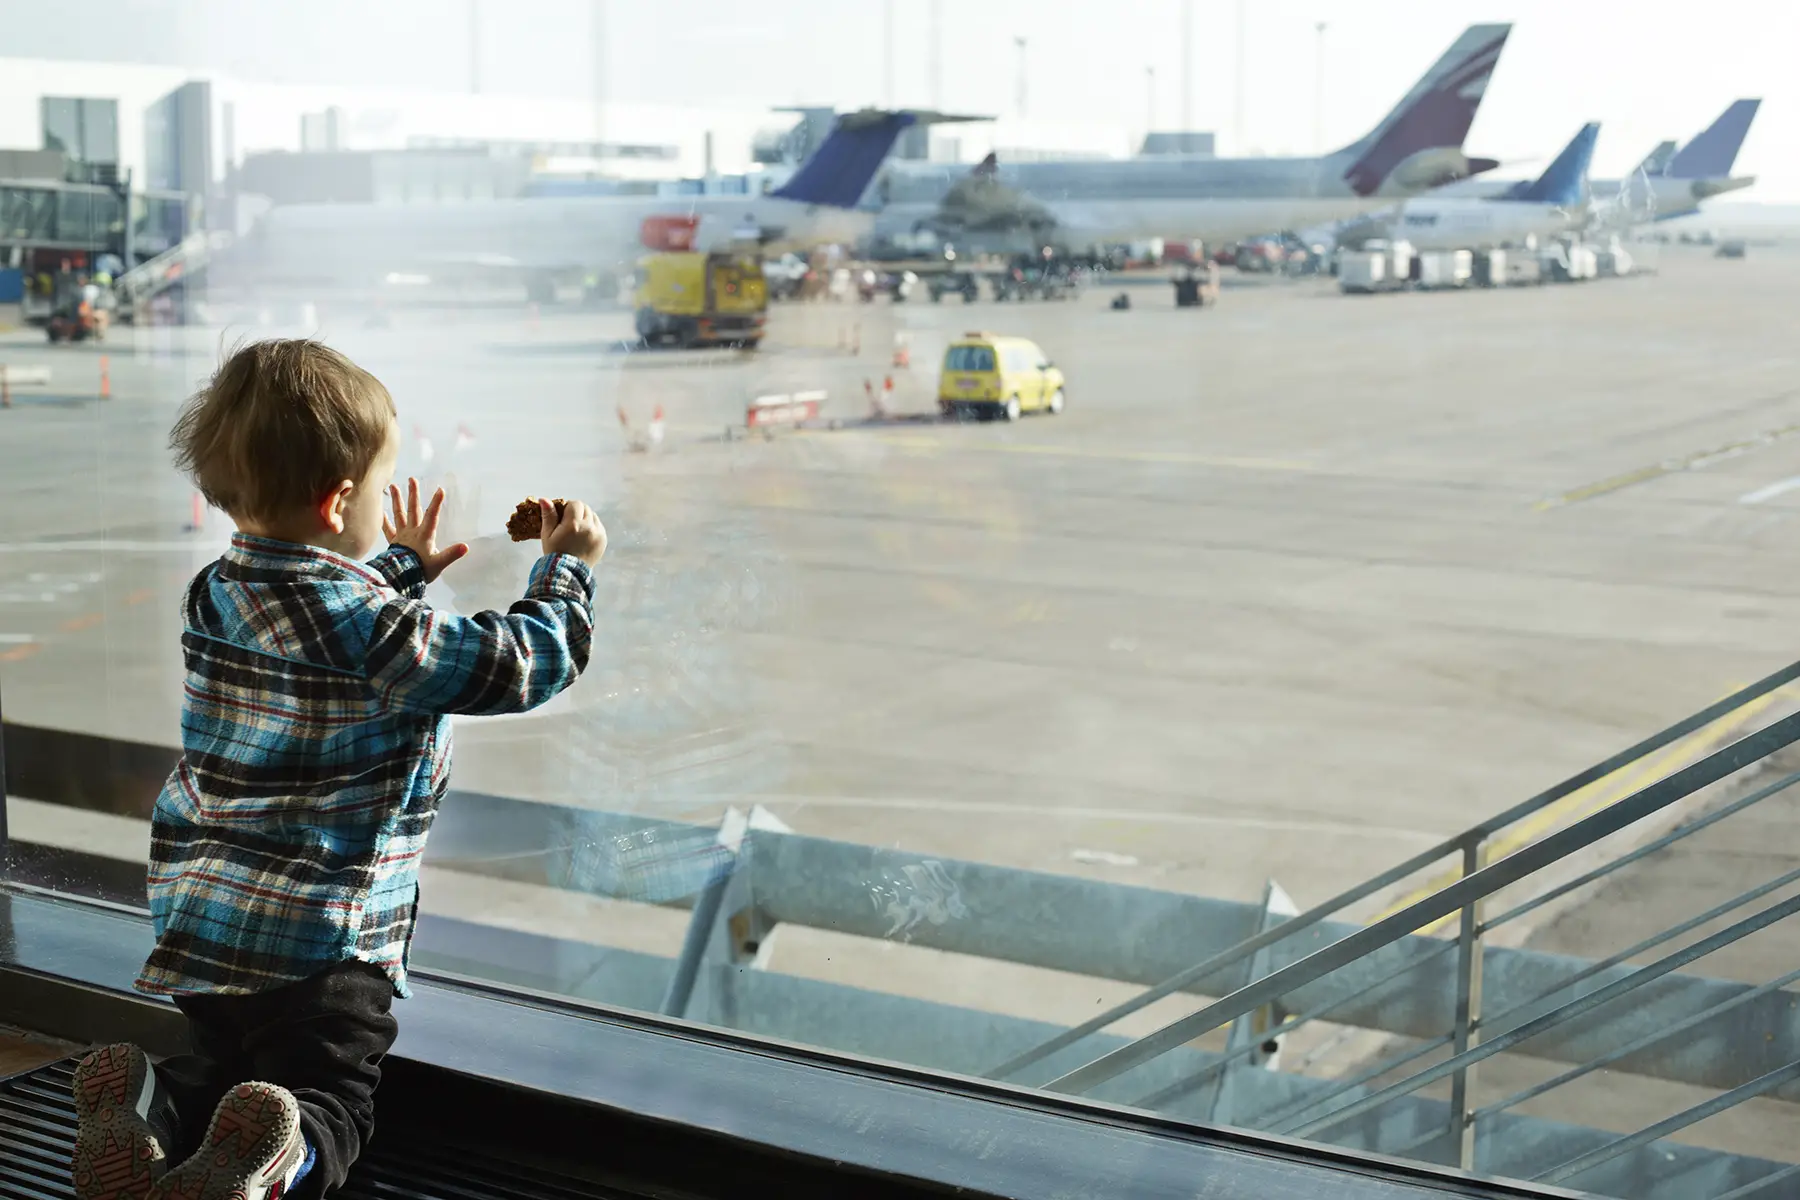 Toddler standing on knees looking through big window at planes at Cape Town airport in South Africa, his family would need visas to be move there